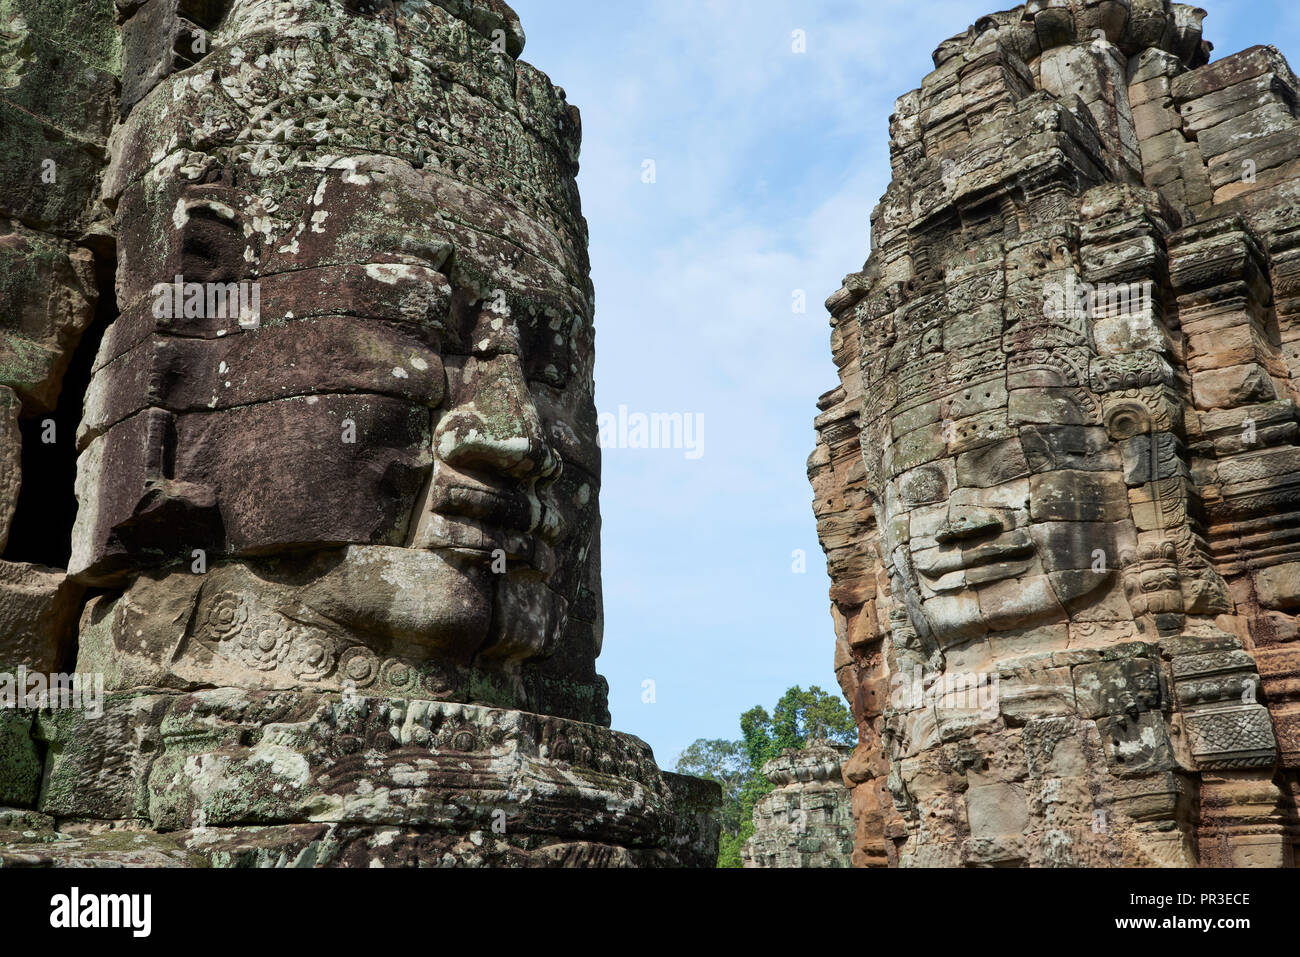 Bayon Temple ruins in Angkor Wat. The Angkor Wat complex, Built during the Khmer Empire age, located in Siem Reap, Cambodia, is the largest religious  Stock Photo